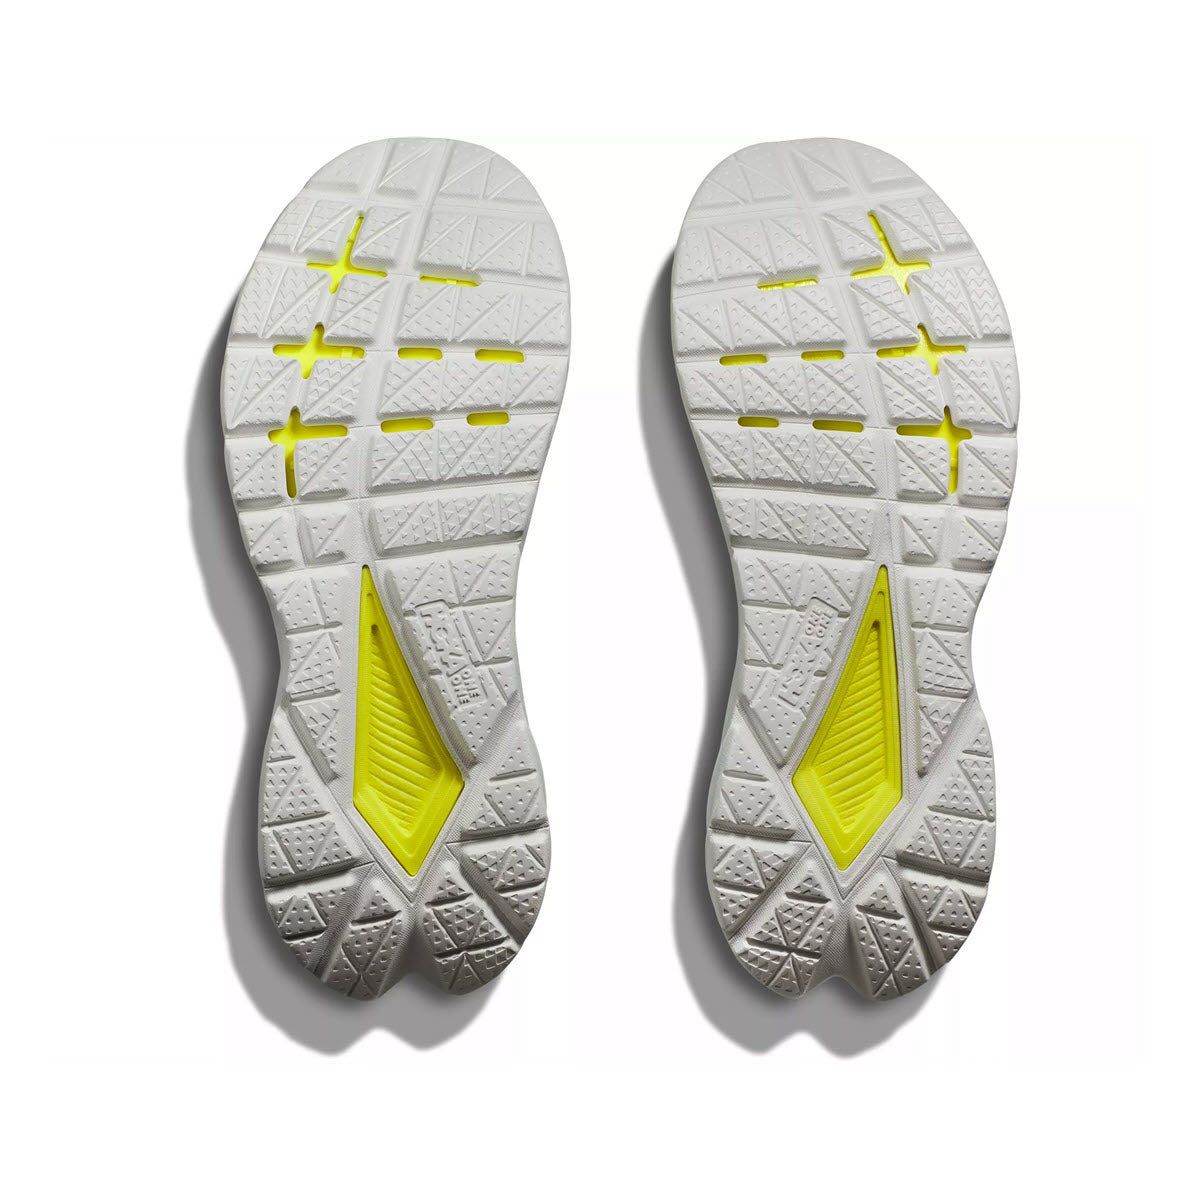 Pair of Hoka running shoes showing white treads and yellow PROFLY midsole elements, isolated on a white background.